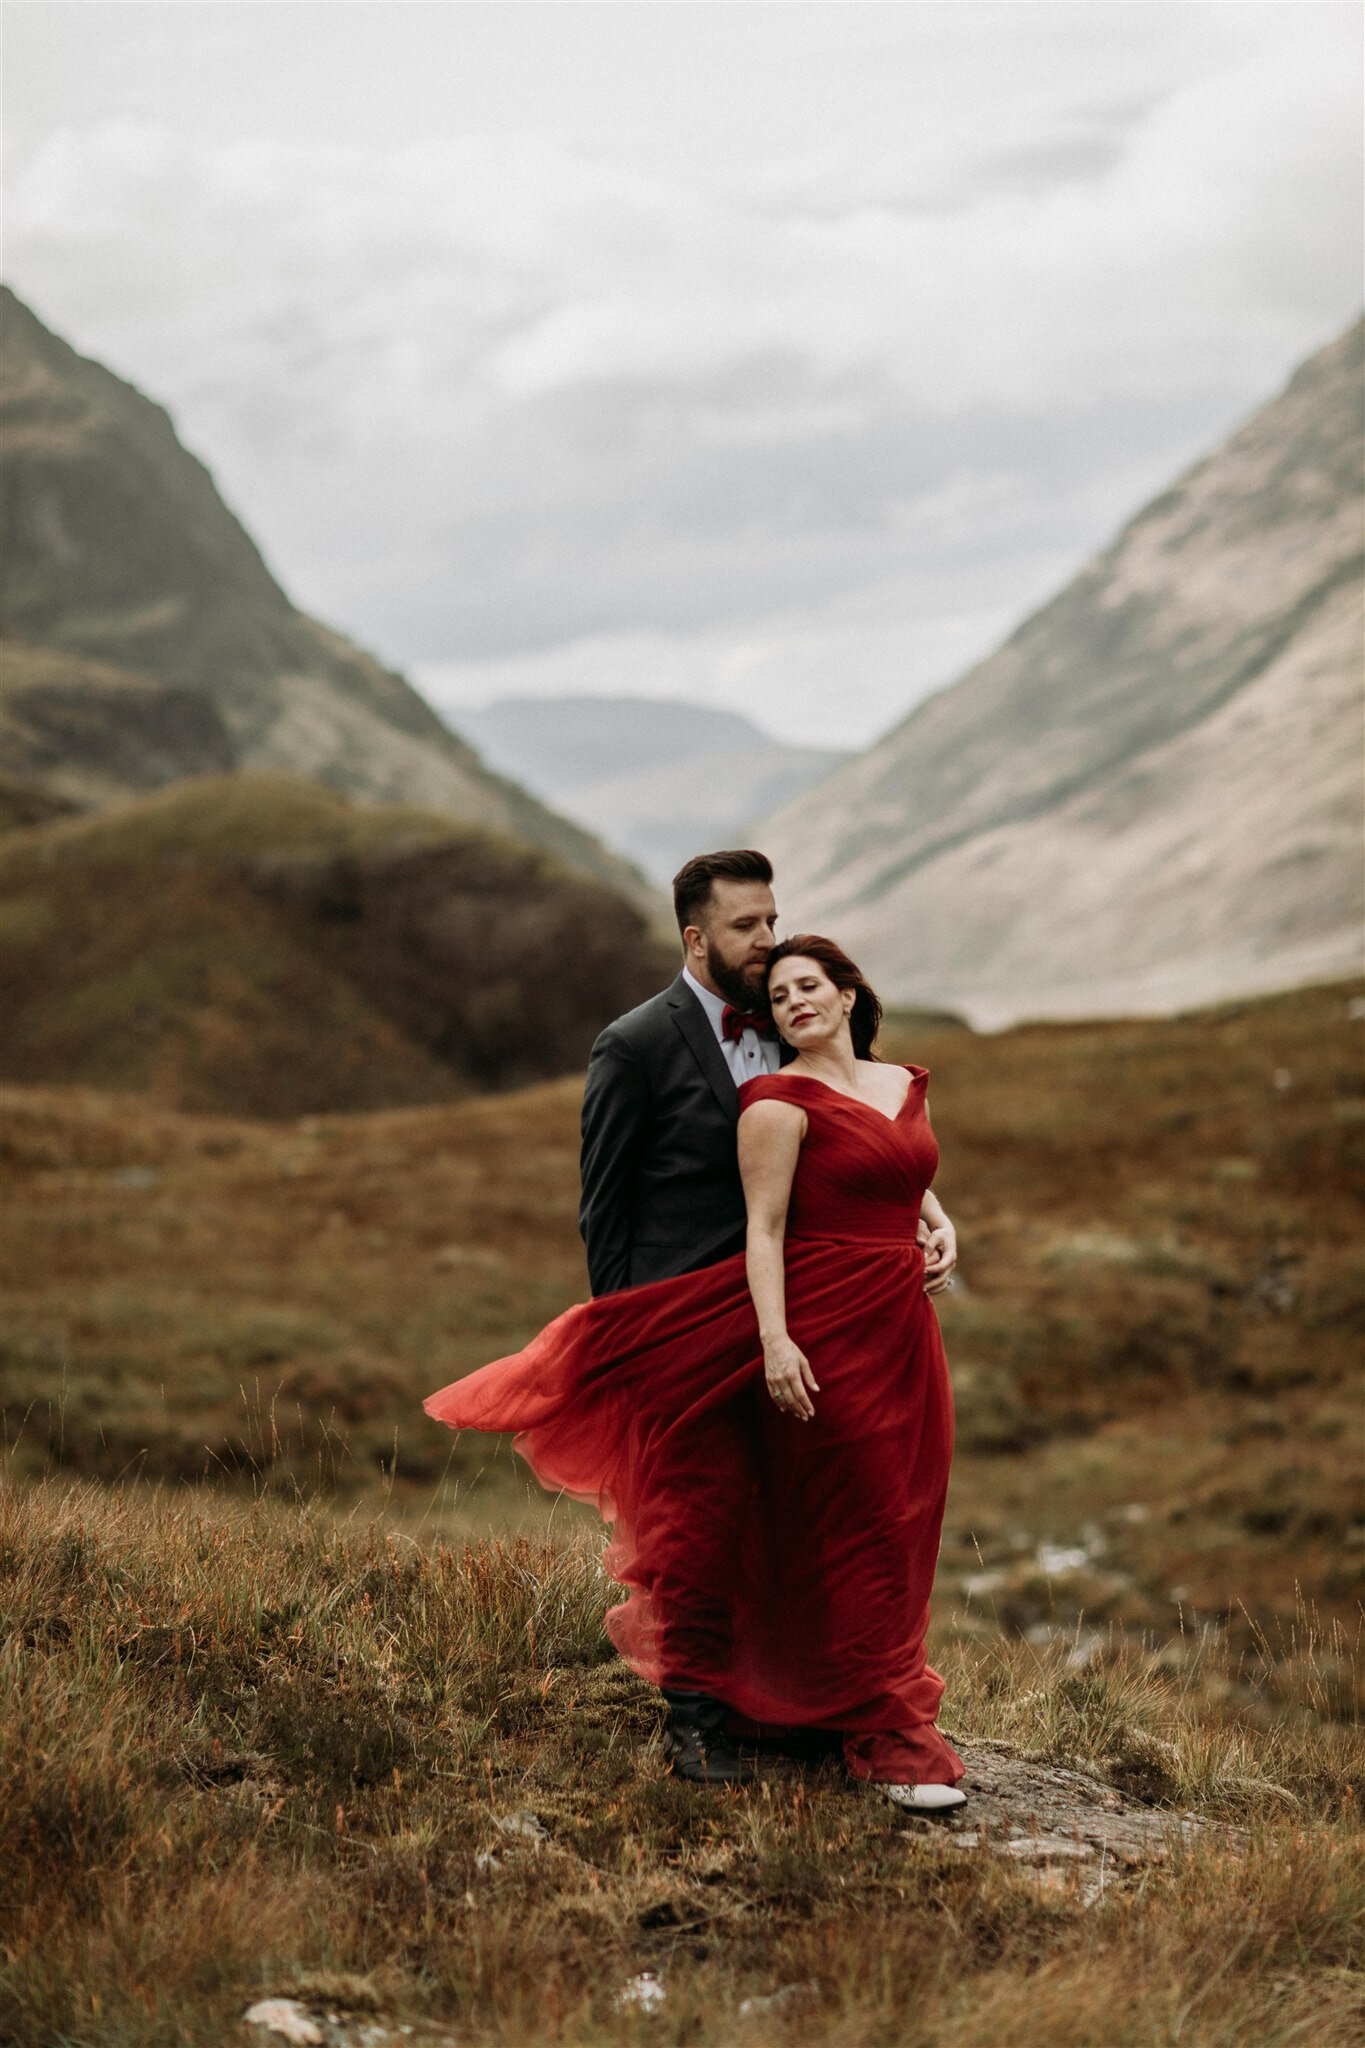 Glen Coe Scotland adventure elopement. Bride in red dress blowing in the wind stands with her back to her groom’s chest in the Scottish Highlands | Adventure elopement photographer